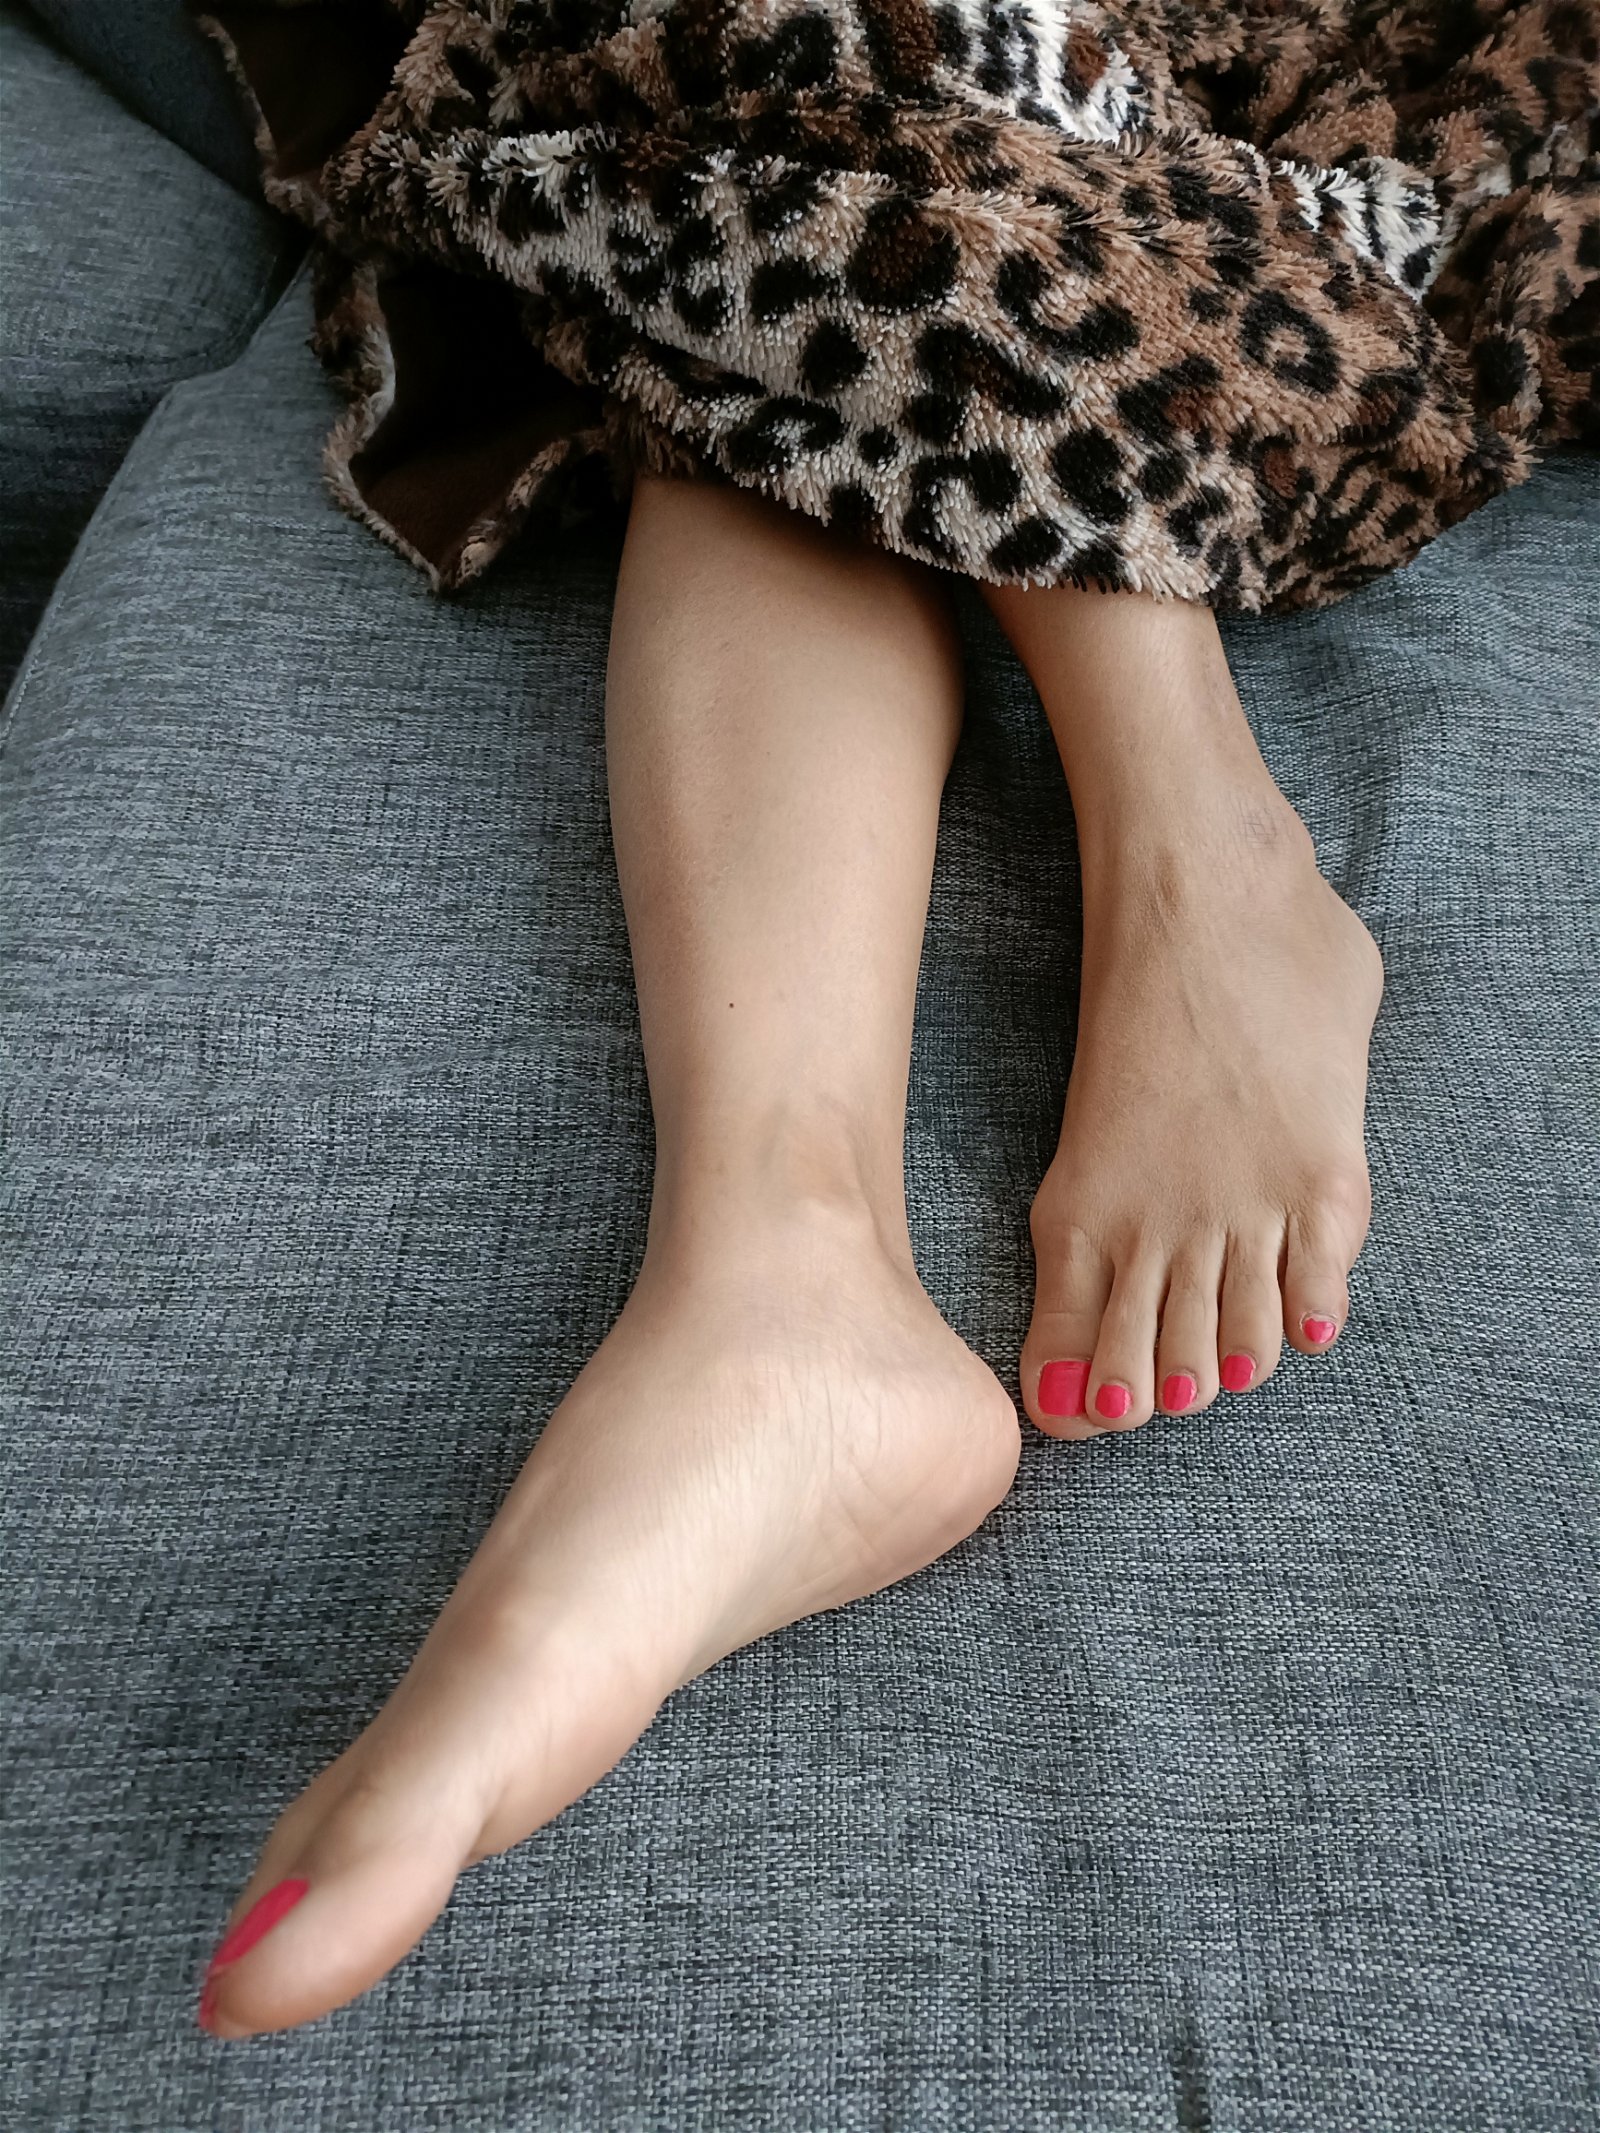 Photo by ThaiMom with the username @ThaiMom, who is a star user,  April 24, 2024 at 10:12 AM. The post is about the topic Sexy Feet and the text says '👣💋

#feet #nails #paintednails #feetfetish #footfetish #fetish #asianfeet #foot'